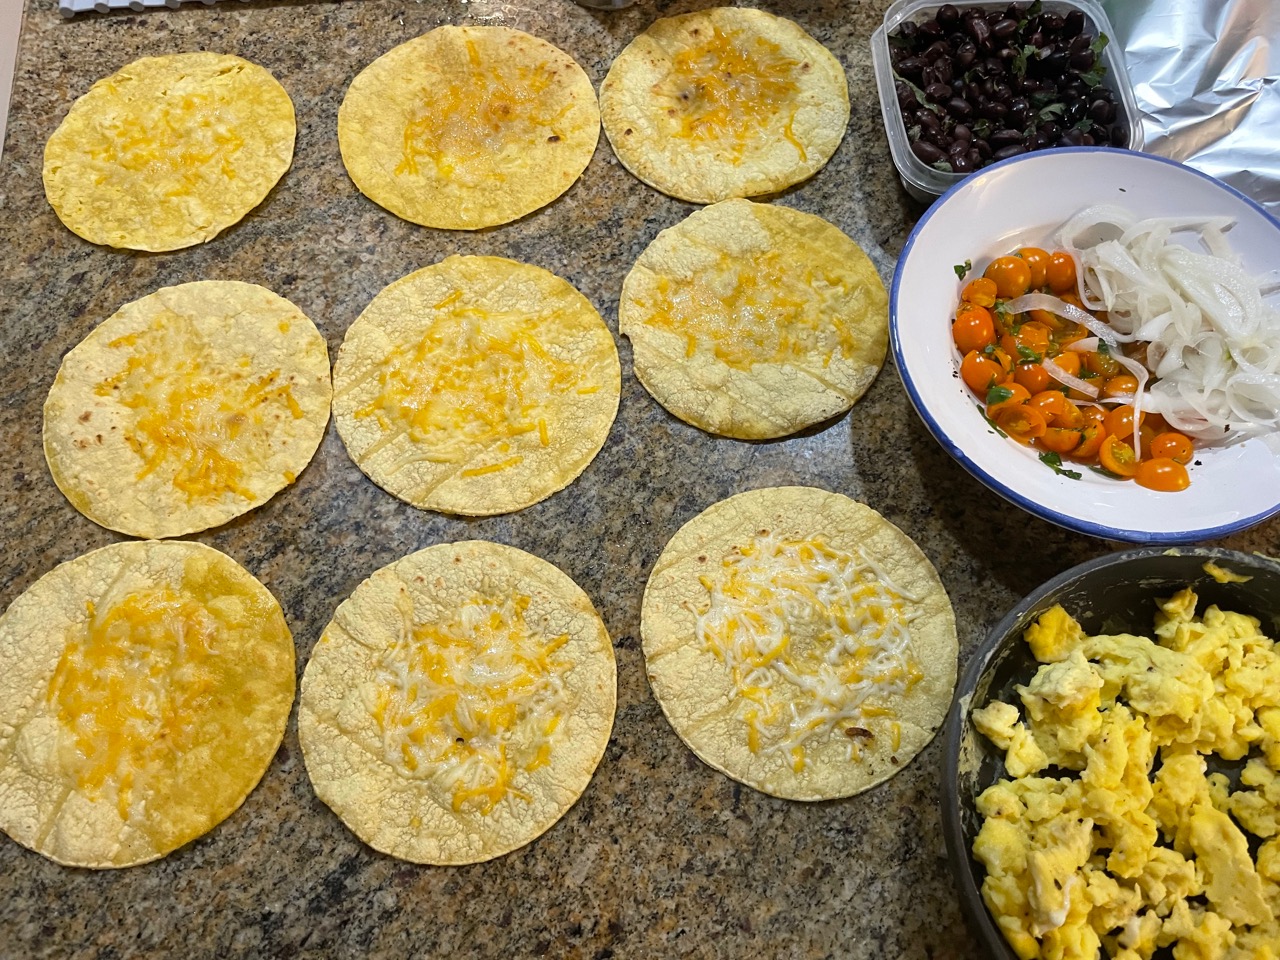 setting the scene, getting ready to fill the tortillas with toppings